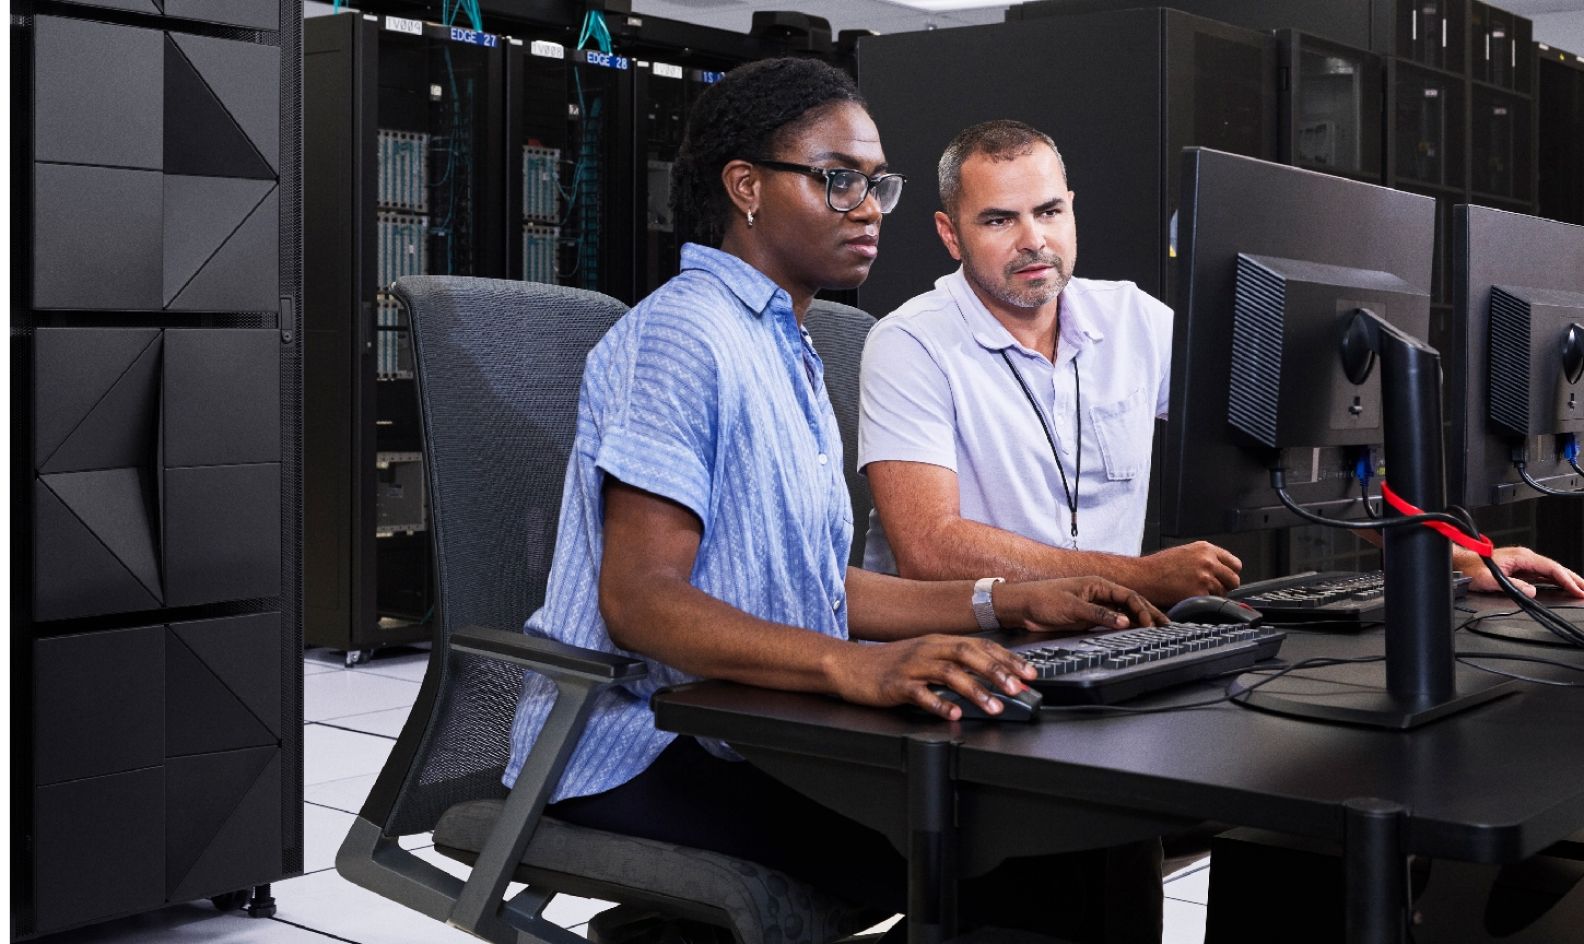 Two workers sitting in a server room working at a computer